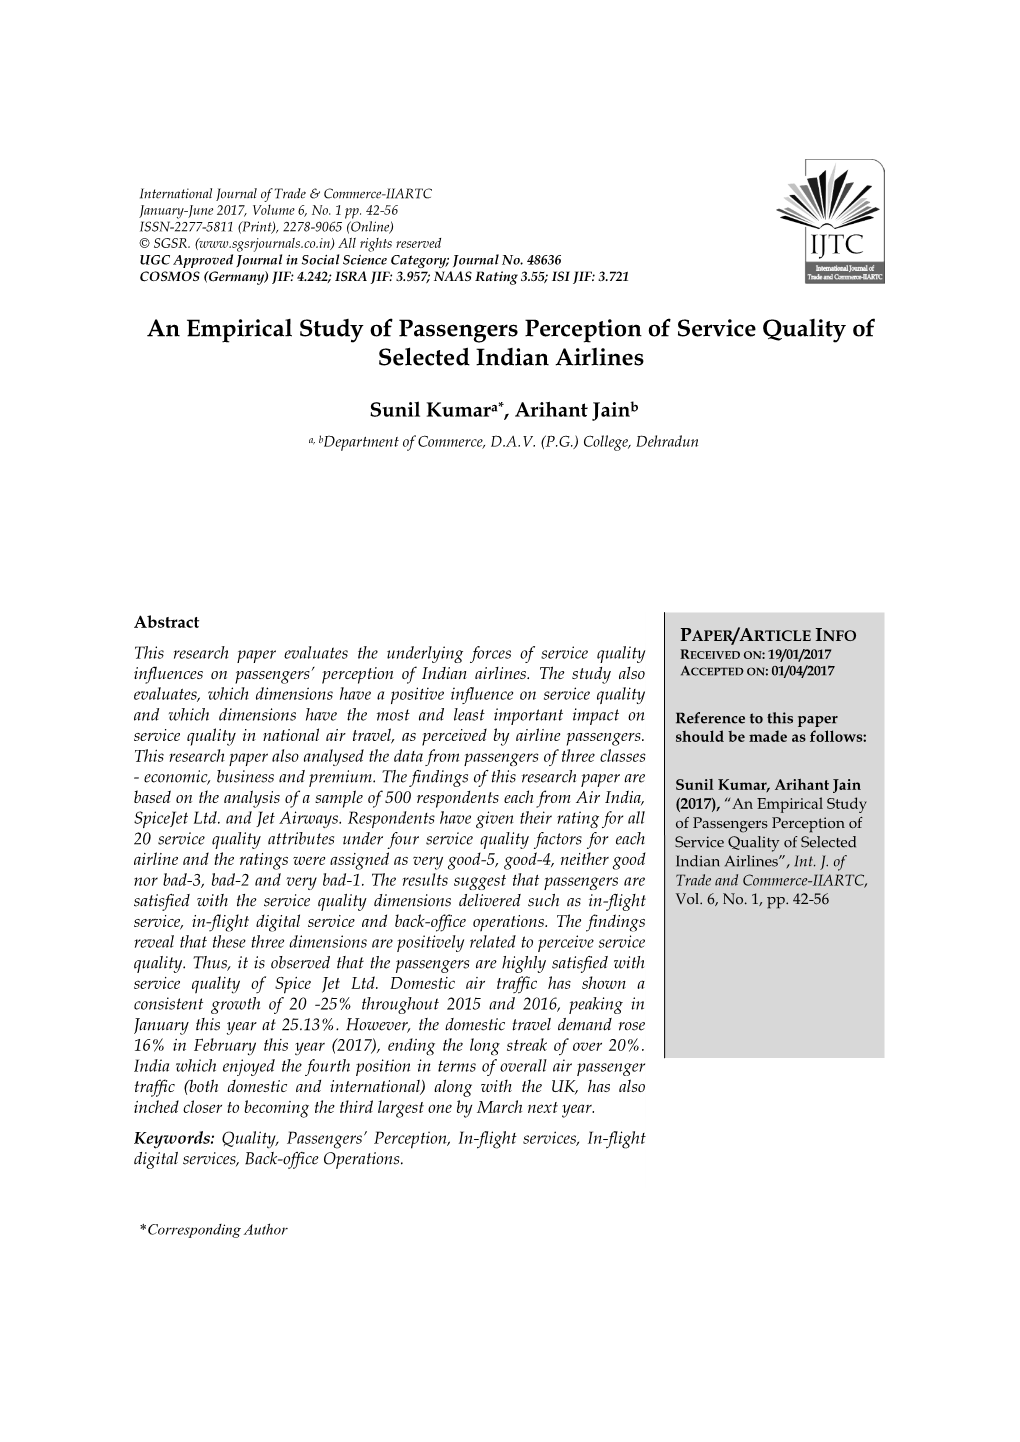 An Empirical Study of Passengers Perception of Service Quality of Selected Indian Airlines